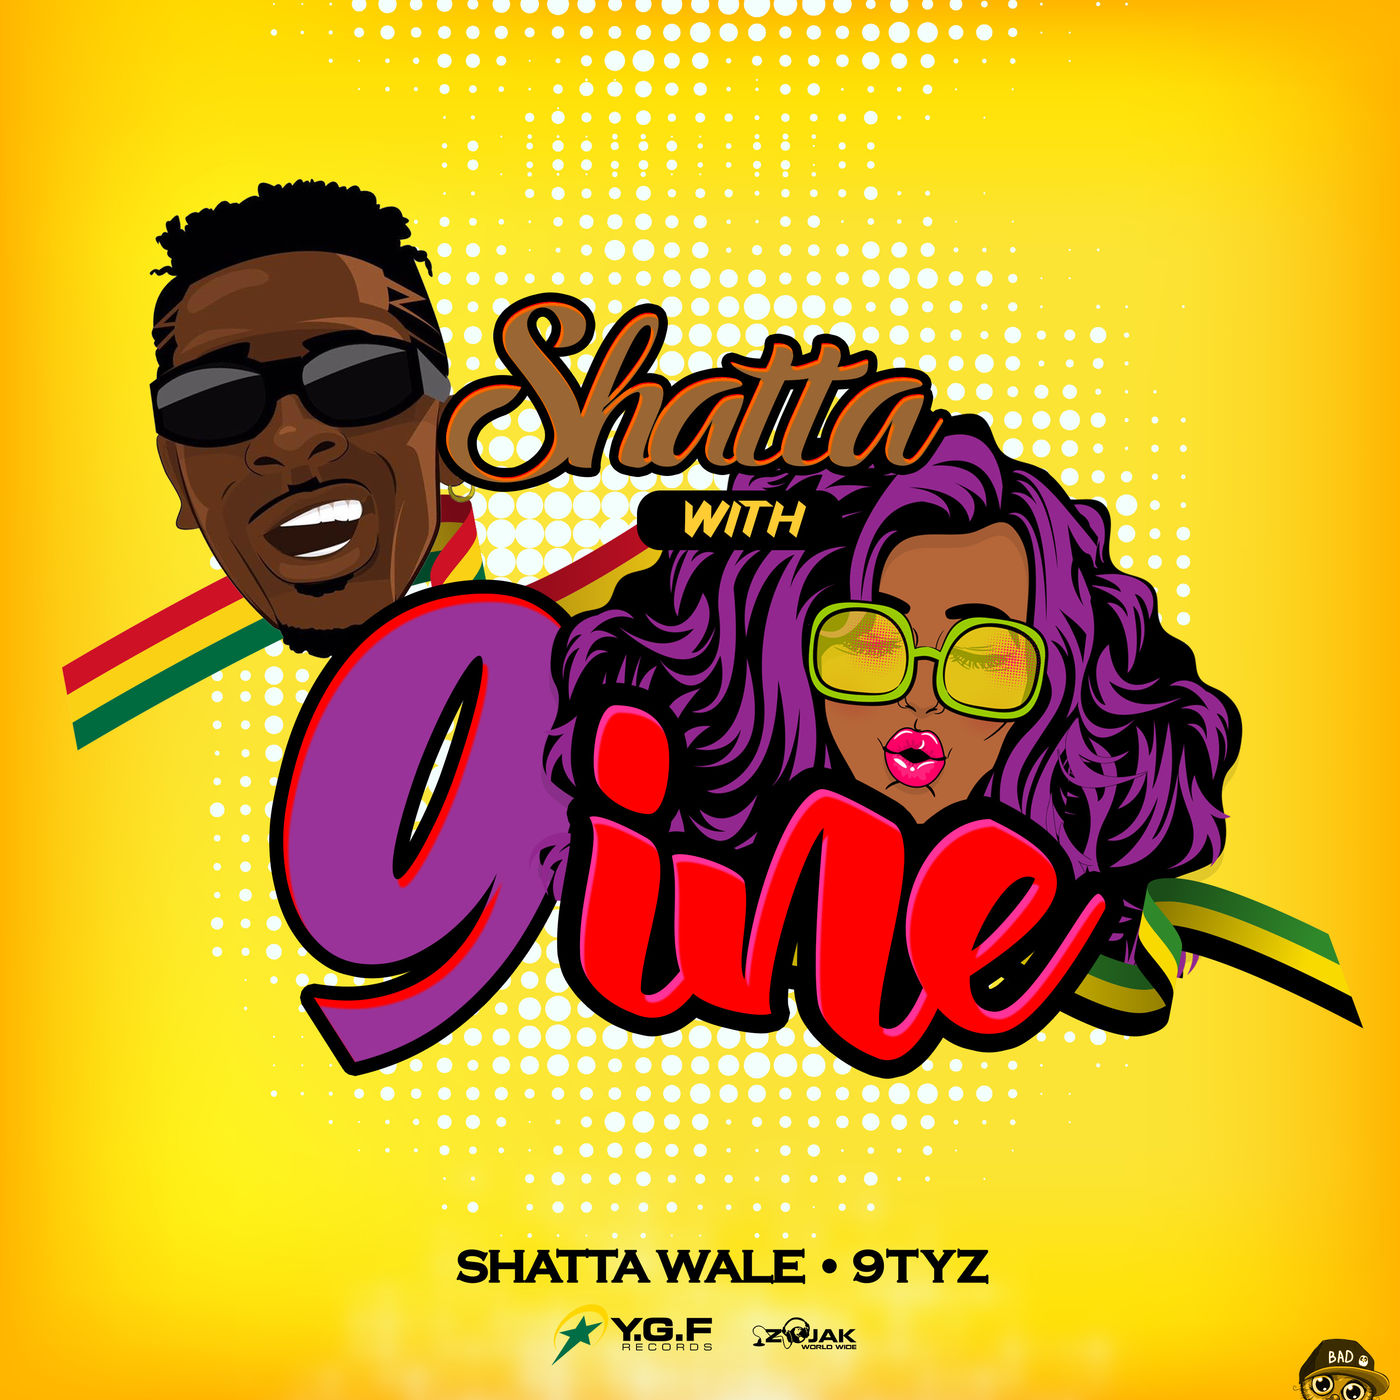 Shatta Wale with